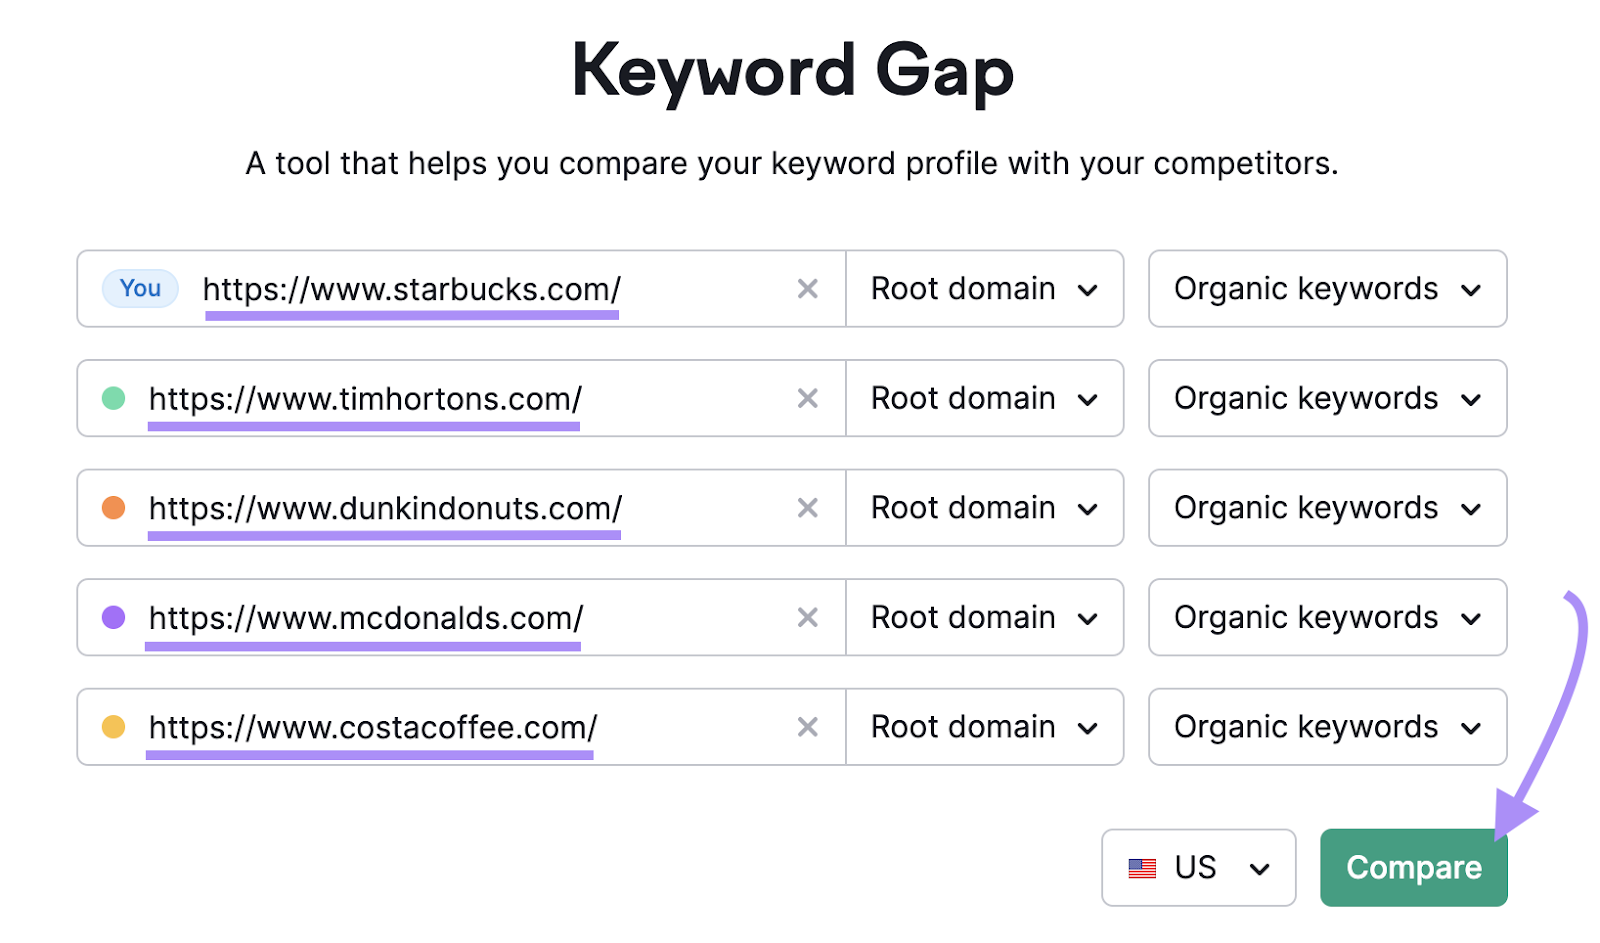 "starbucks.com" and four competitors entered into the Keyword Gap tool search bars